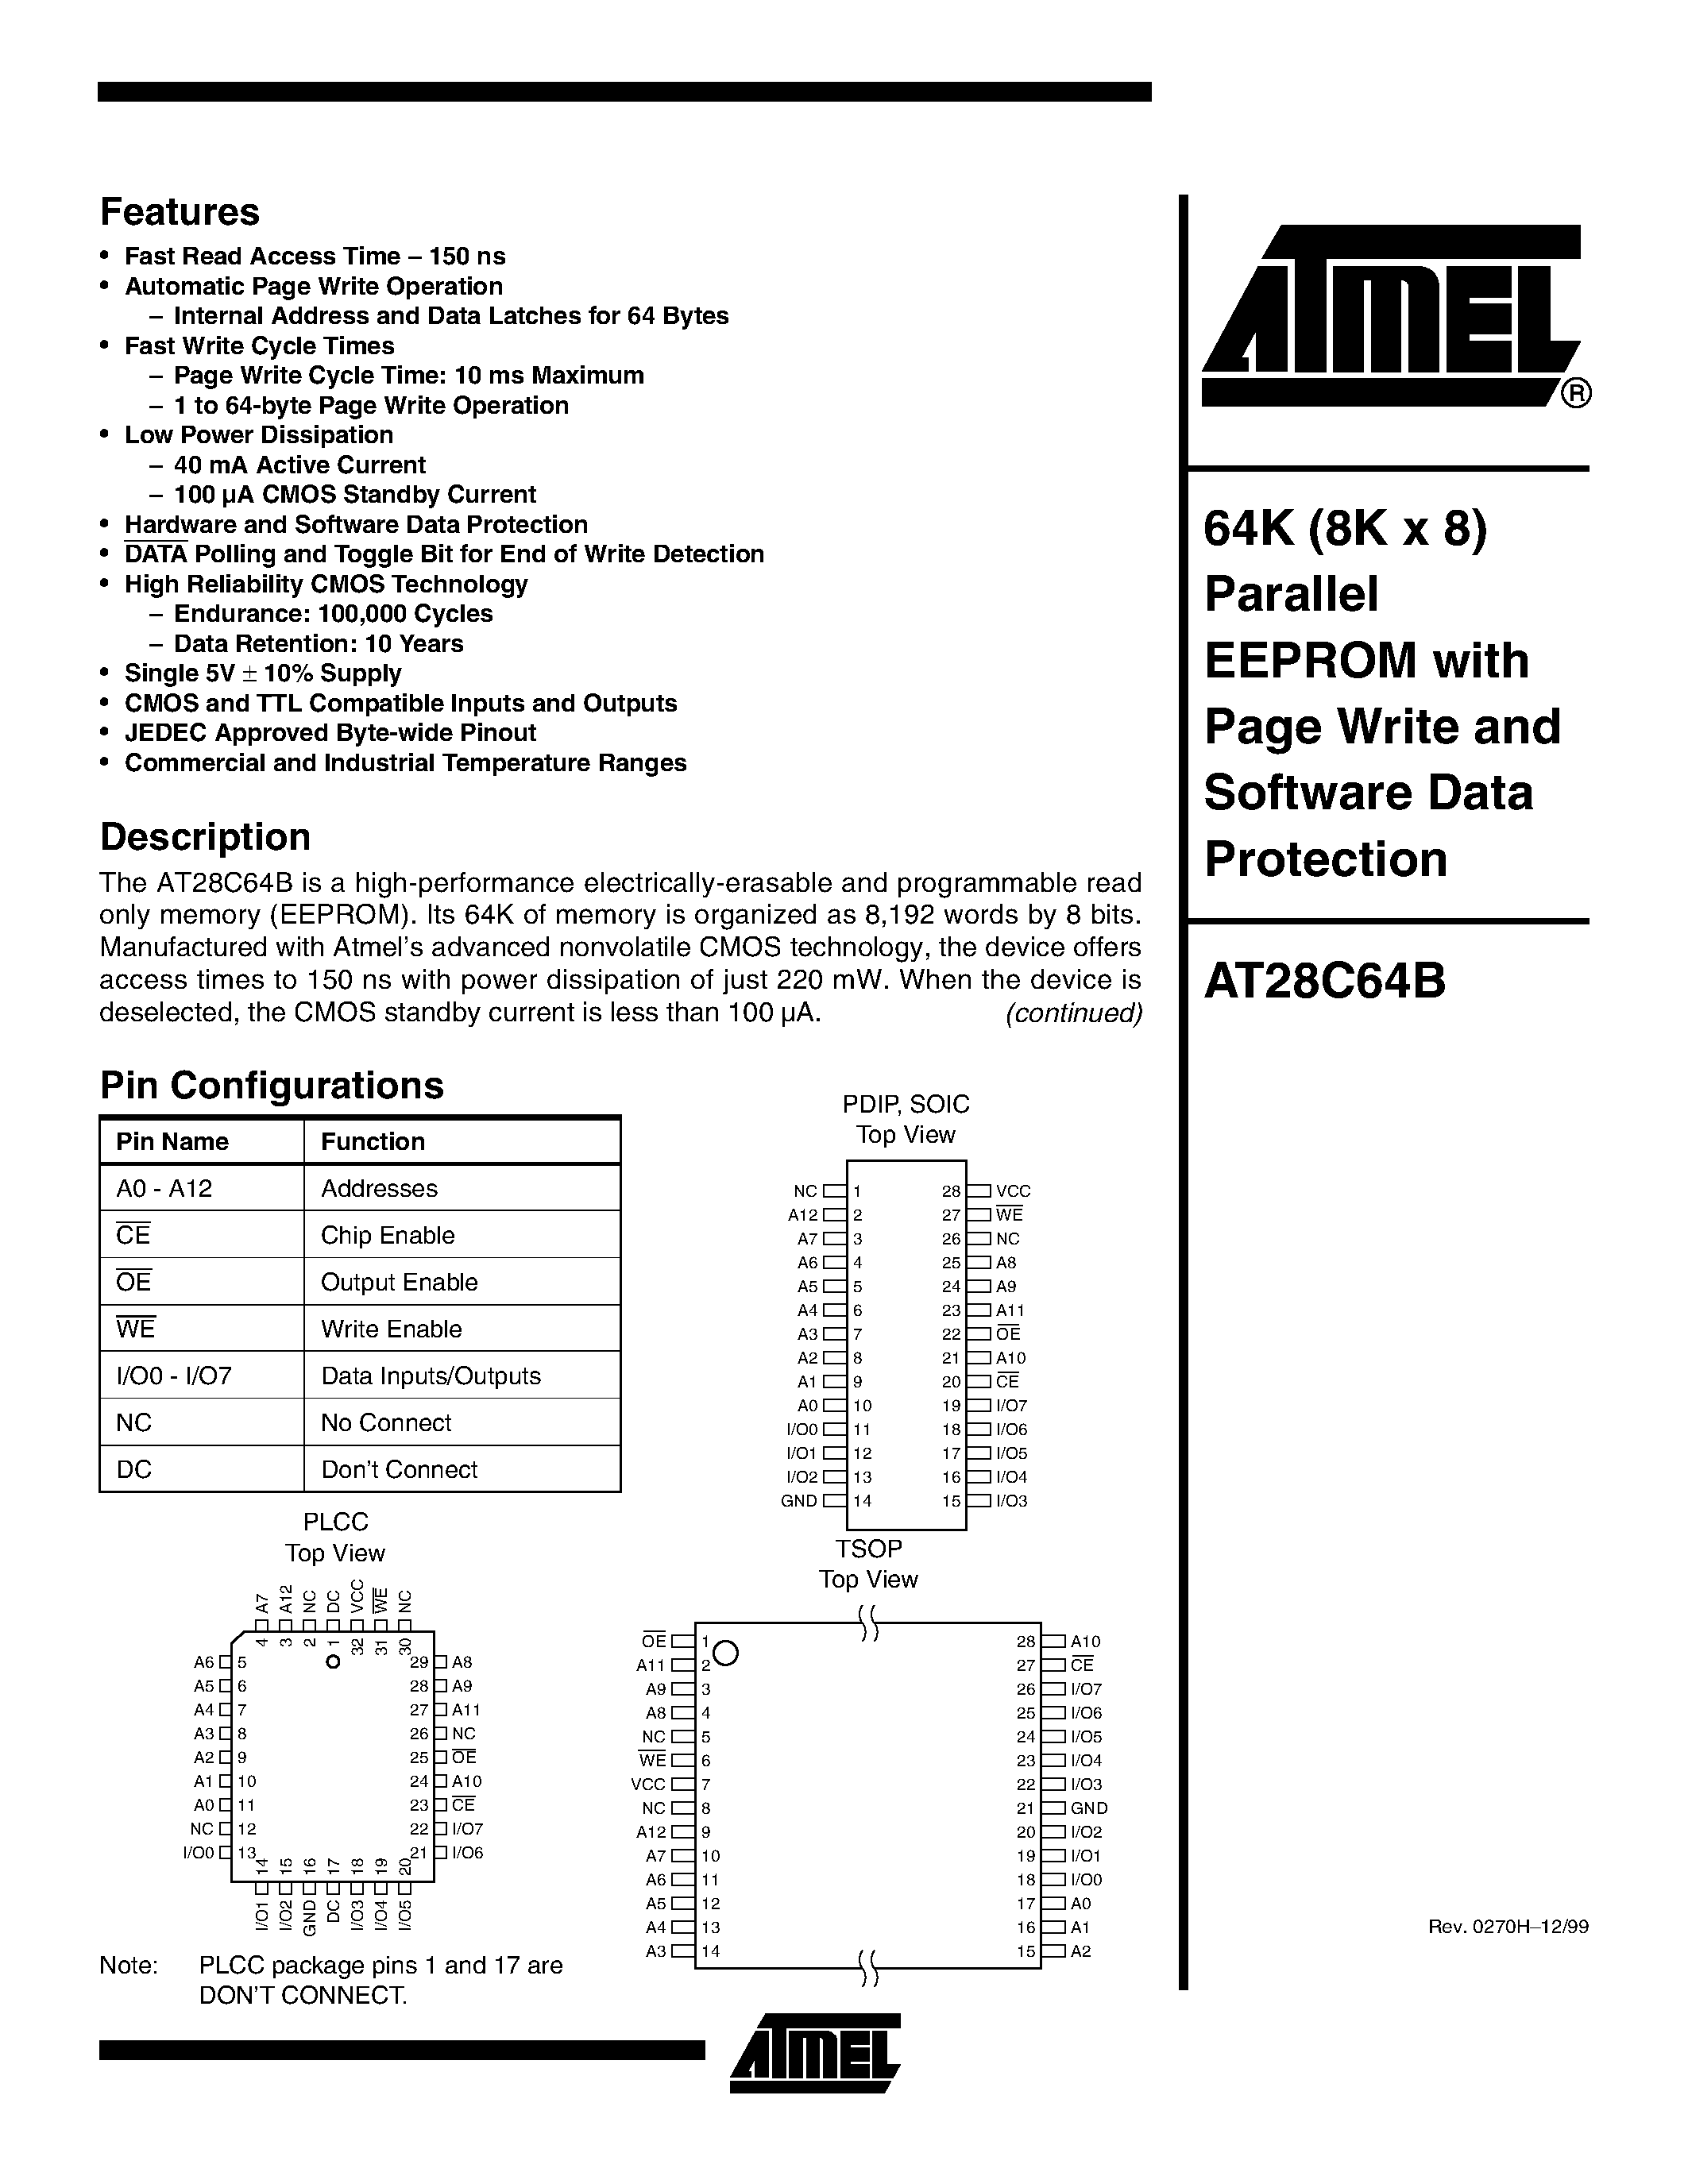 Datasheet AT28C64B-W - 64K (8K x 8) CMOS E2PROM with Page Write and Software Data Protection page 1